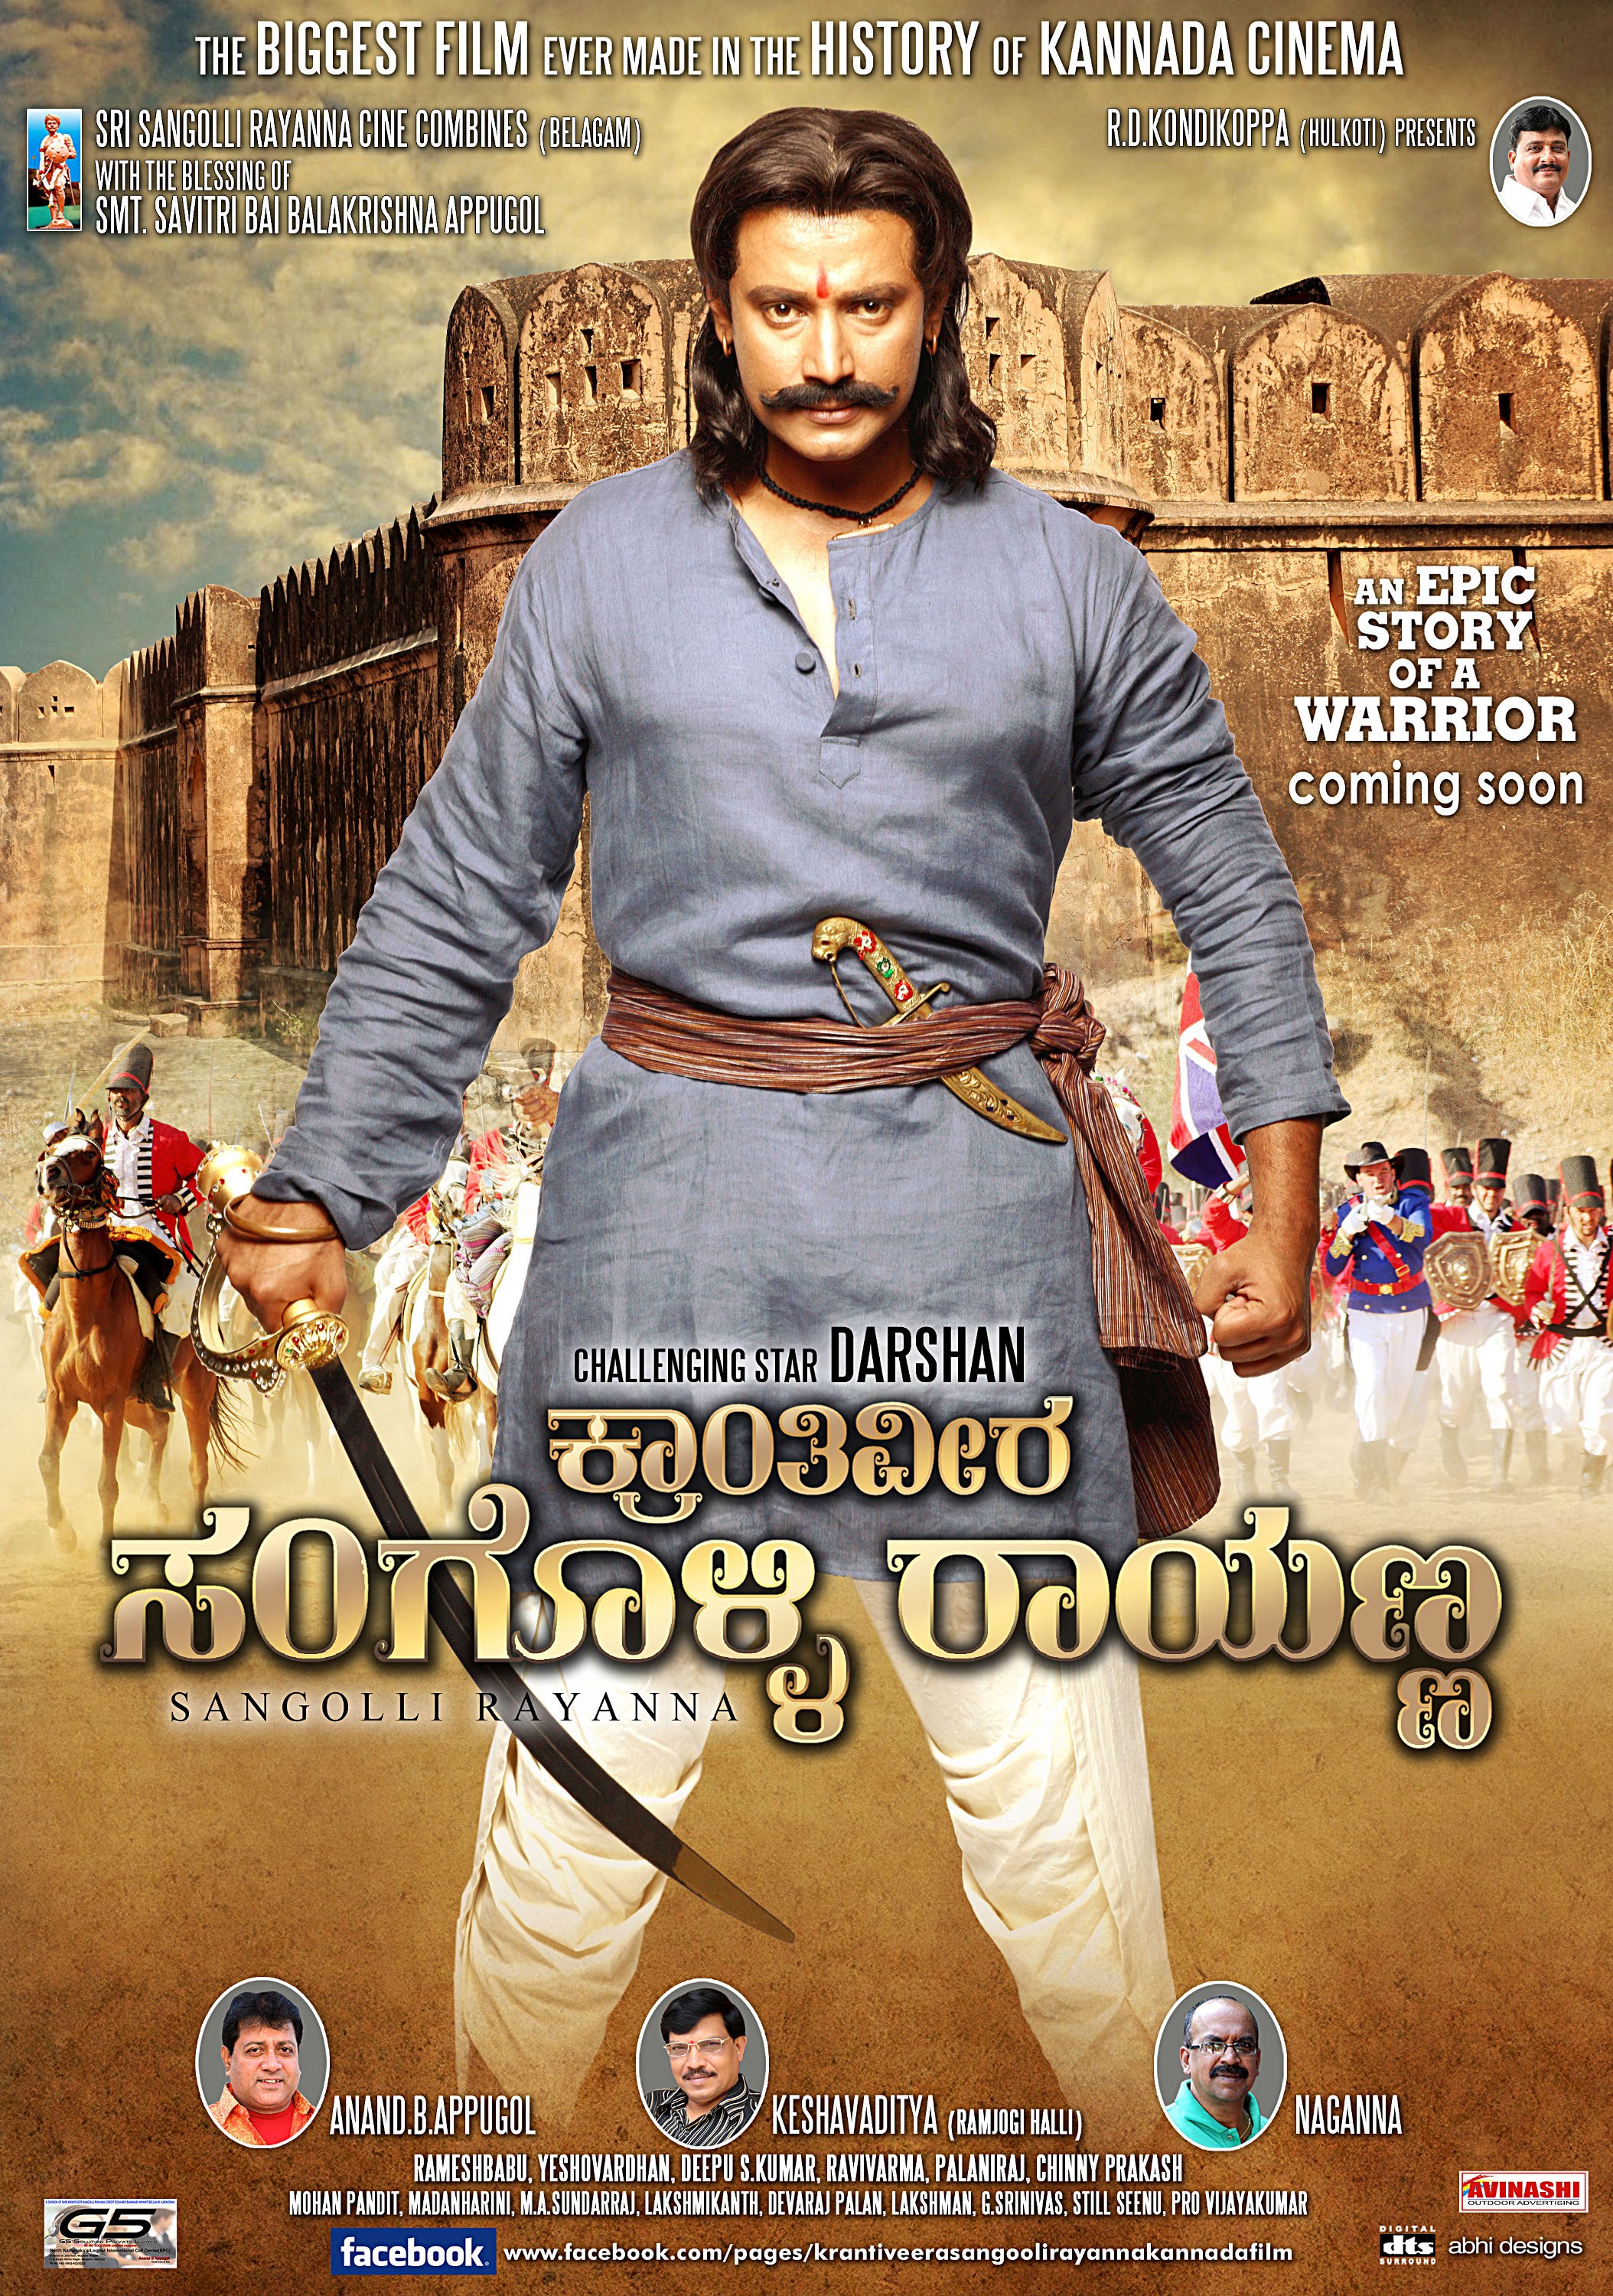 Mega Sized Movie Poster Image for Sangolli Rayanna (#37 of 79)